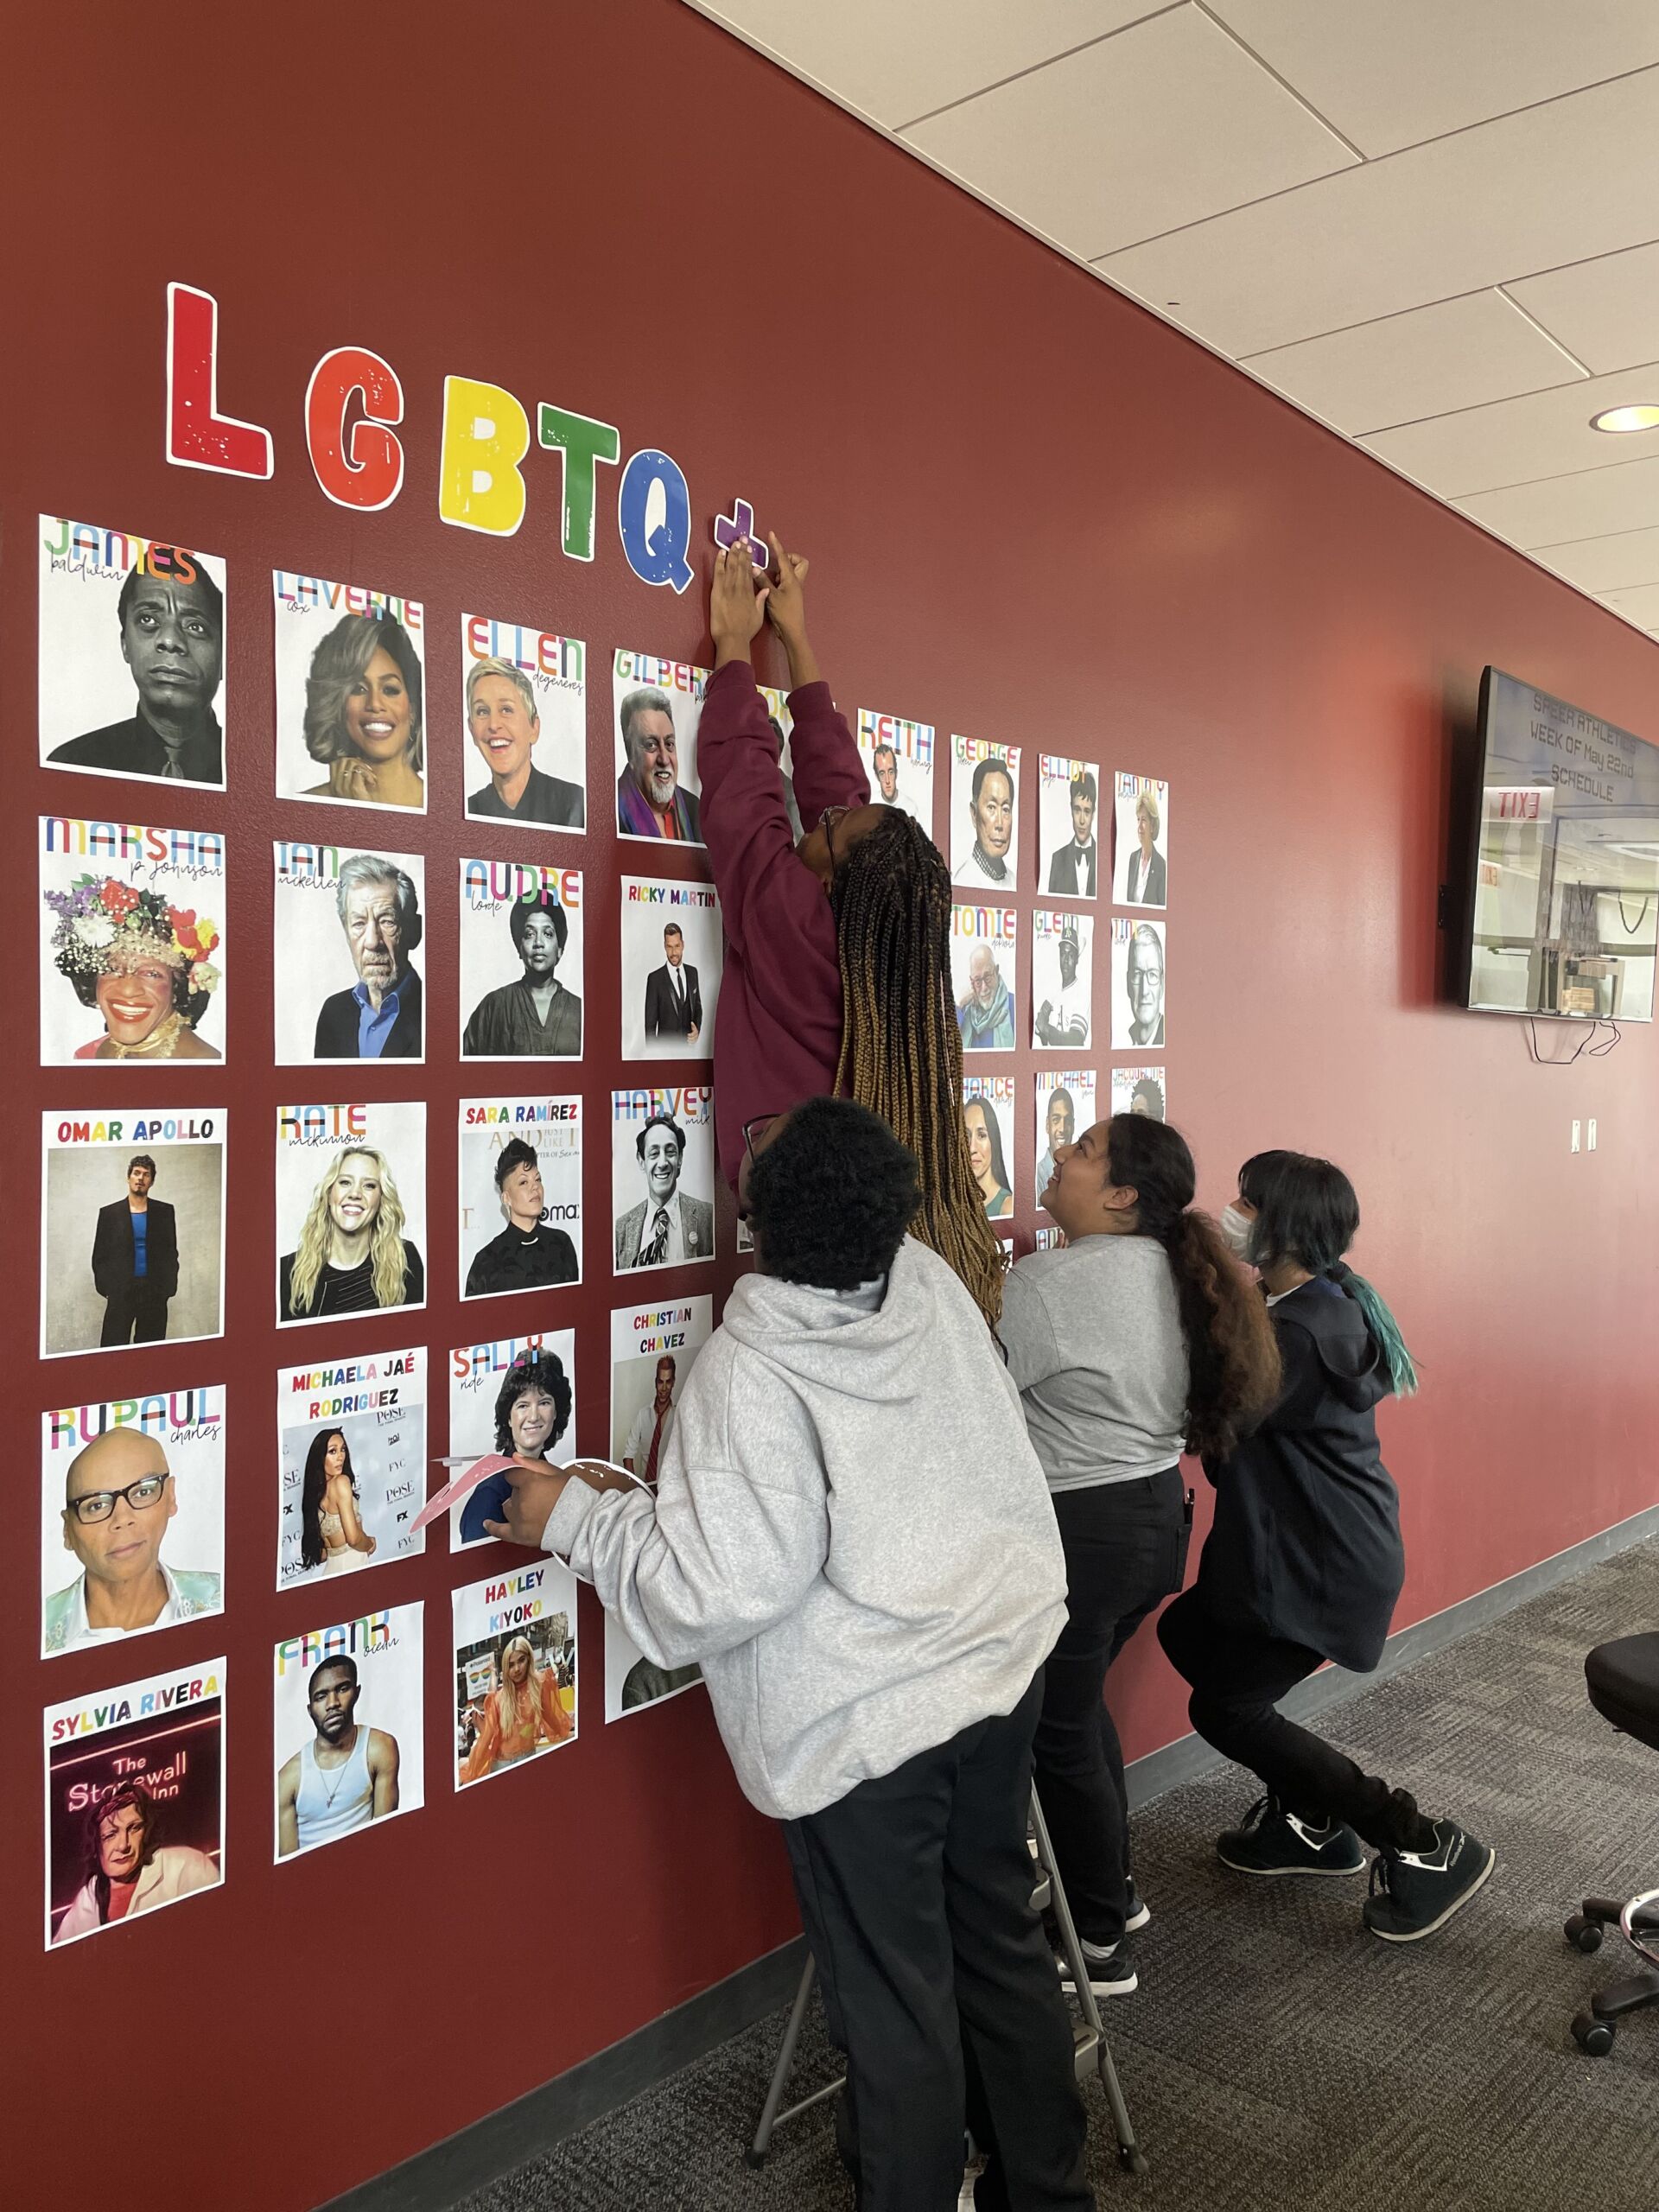 Four students at ITW David Speer Academy work together to put up decorations for Pride Month. One student is standing on a chair and taping up the plus sign in LGBTQ+ on the wall over the top of many photos of famous queer people. The other three students are looking up at them.